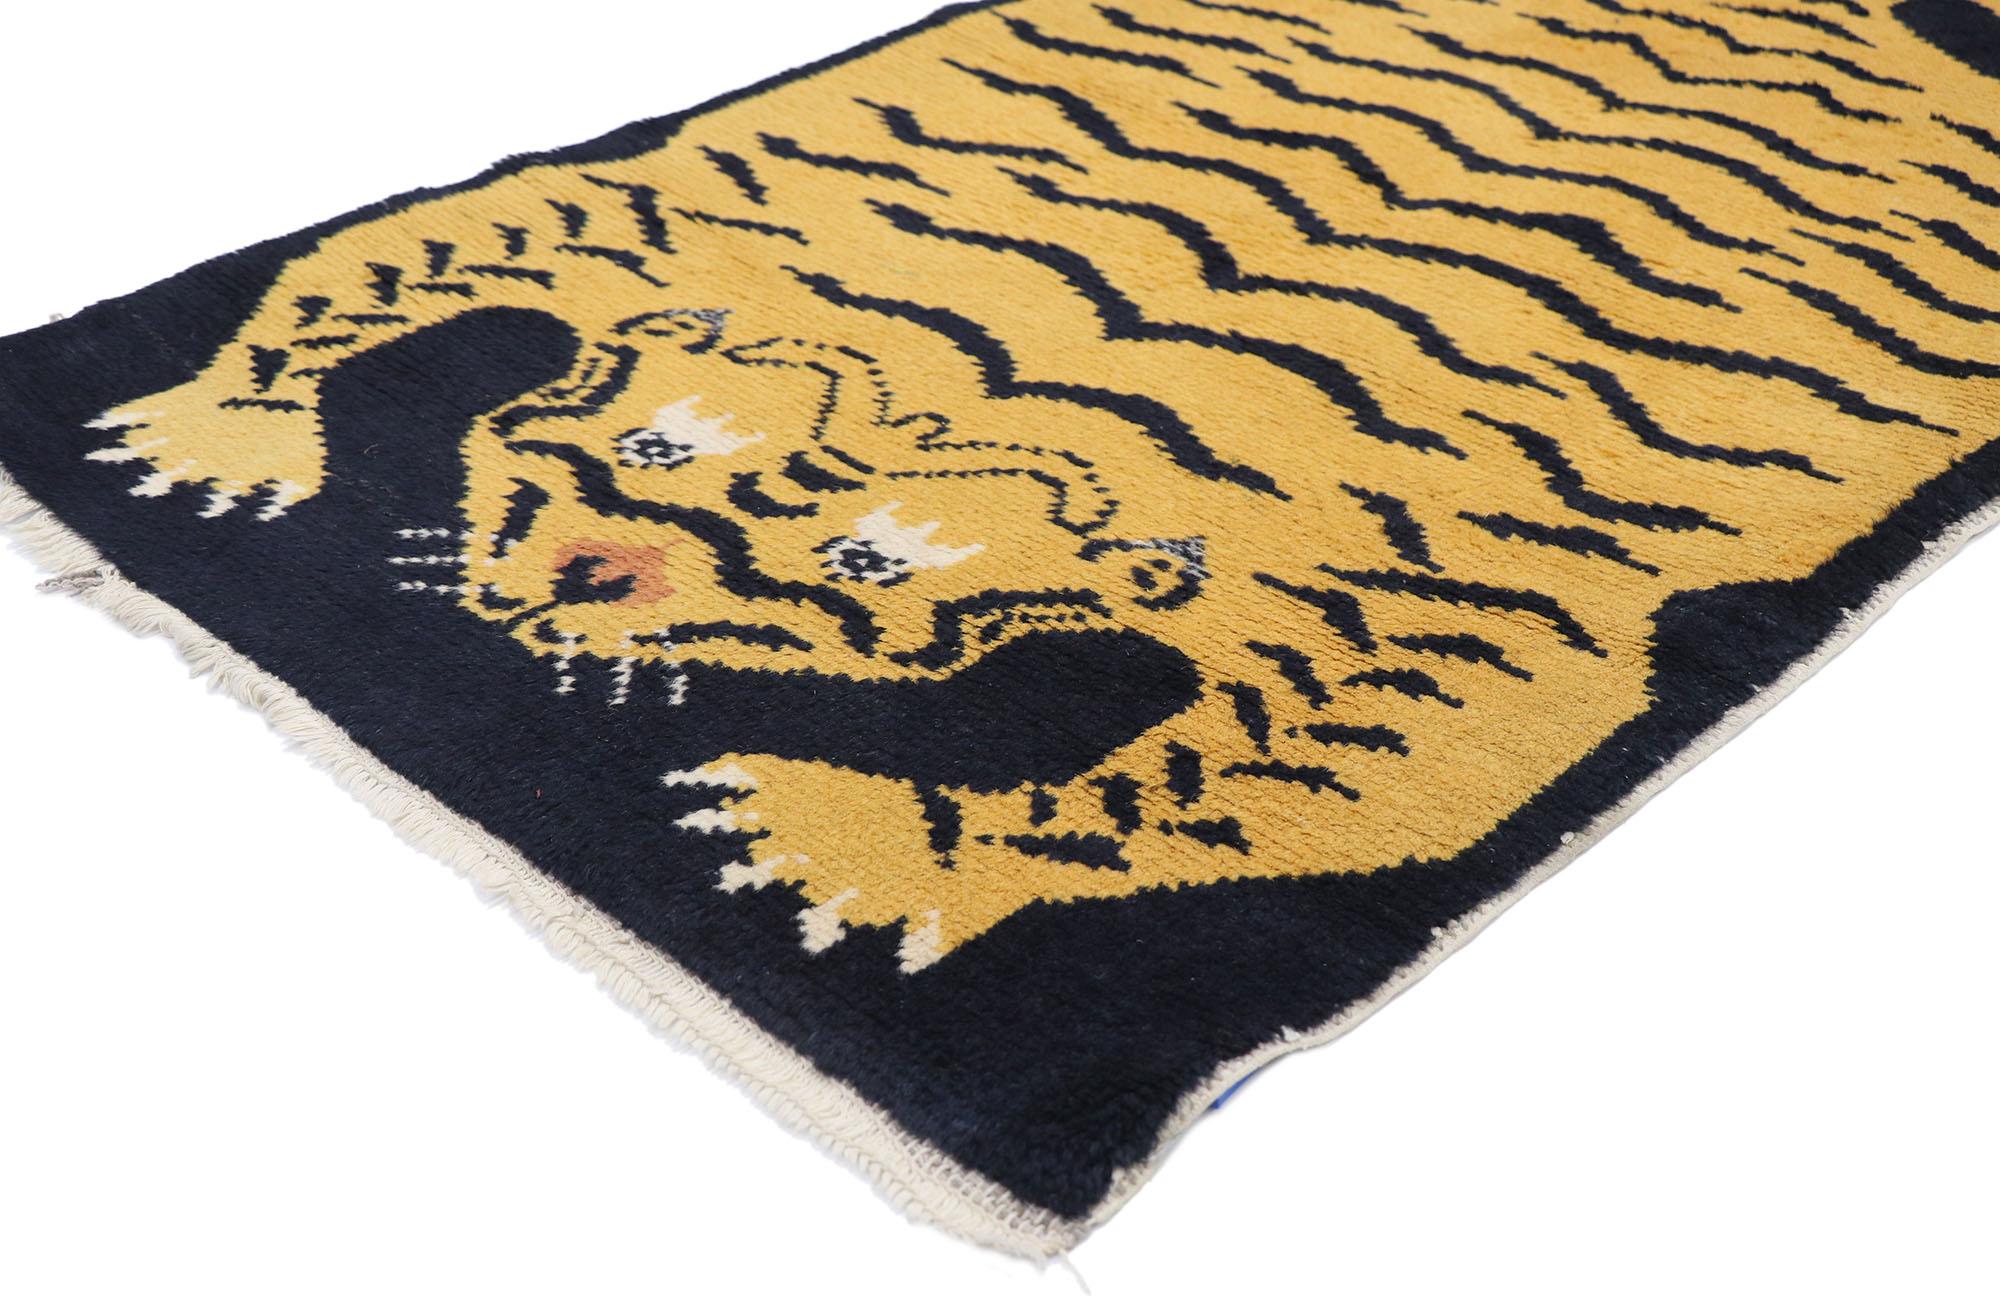 78075 Vintage Tibetan Tiger rug 02'08 x 04'10. Be fiercely stylish with this hand-knotted wool vintage Tibetan tiger rug. The black field features a Tibetan tiger. The tiger is usually thought to symbolize strength and bravery. This depth of meaning